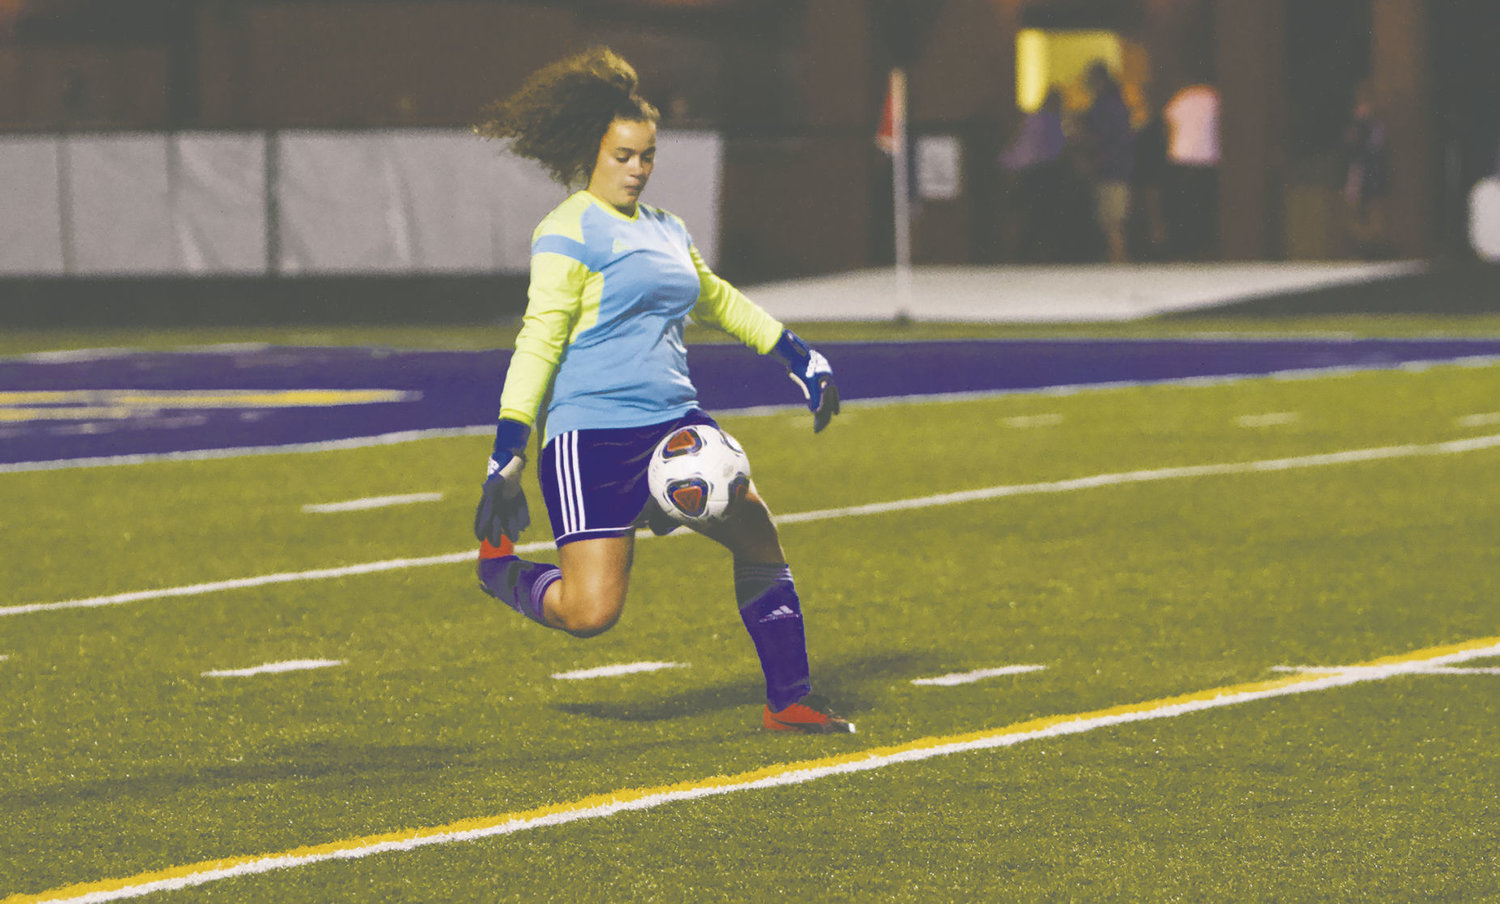 Crawfordsville goalkeeper Sierra Hutchison saw her four-year playing career come to a close in the Athenian's loss to Tri-West.